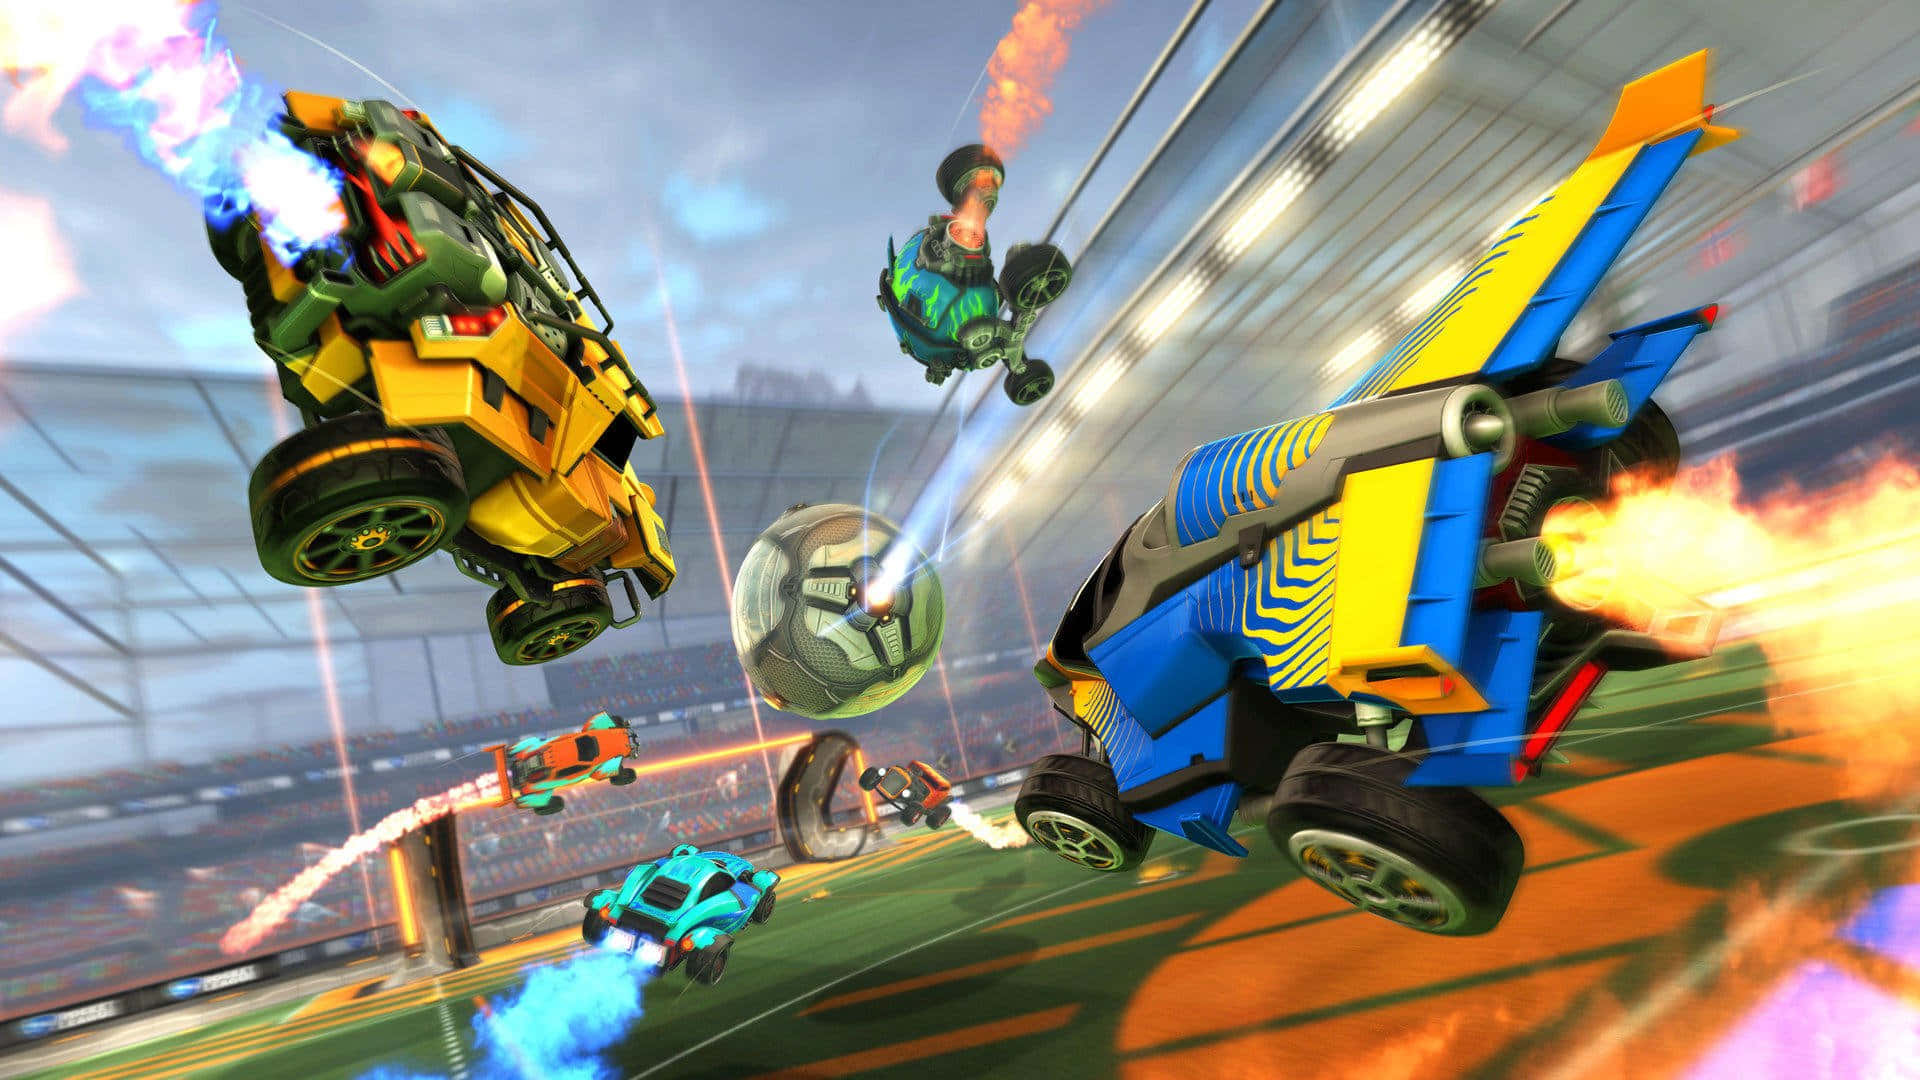 Get Ready to up your game with 1080p Rocket League